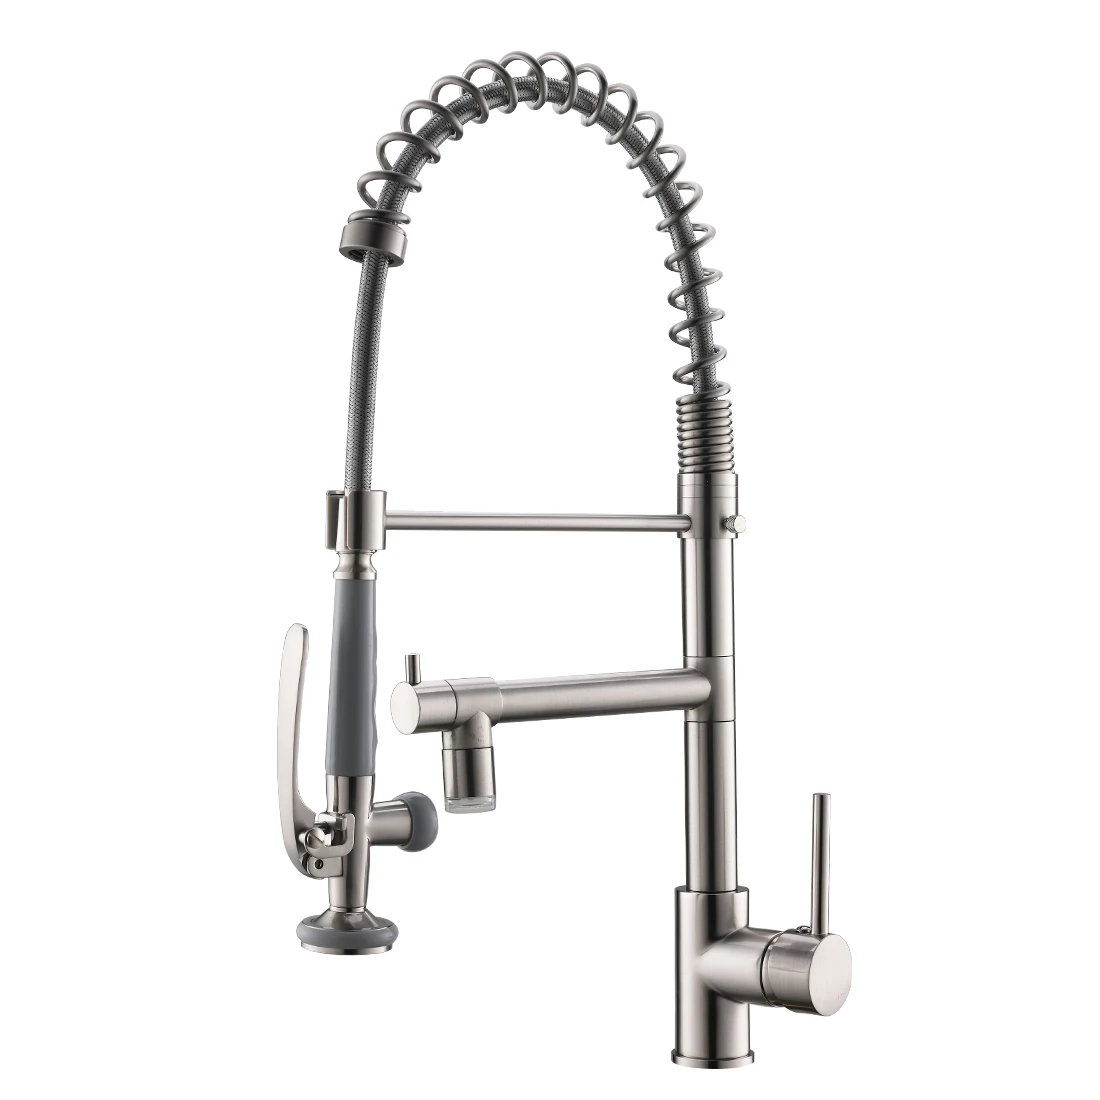 FLG:NL512 Brushed Nickel Metal 1-Hole Swivel Spout Kitchen Mixer Tap with 3 Color LED Lights